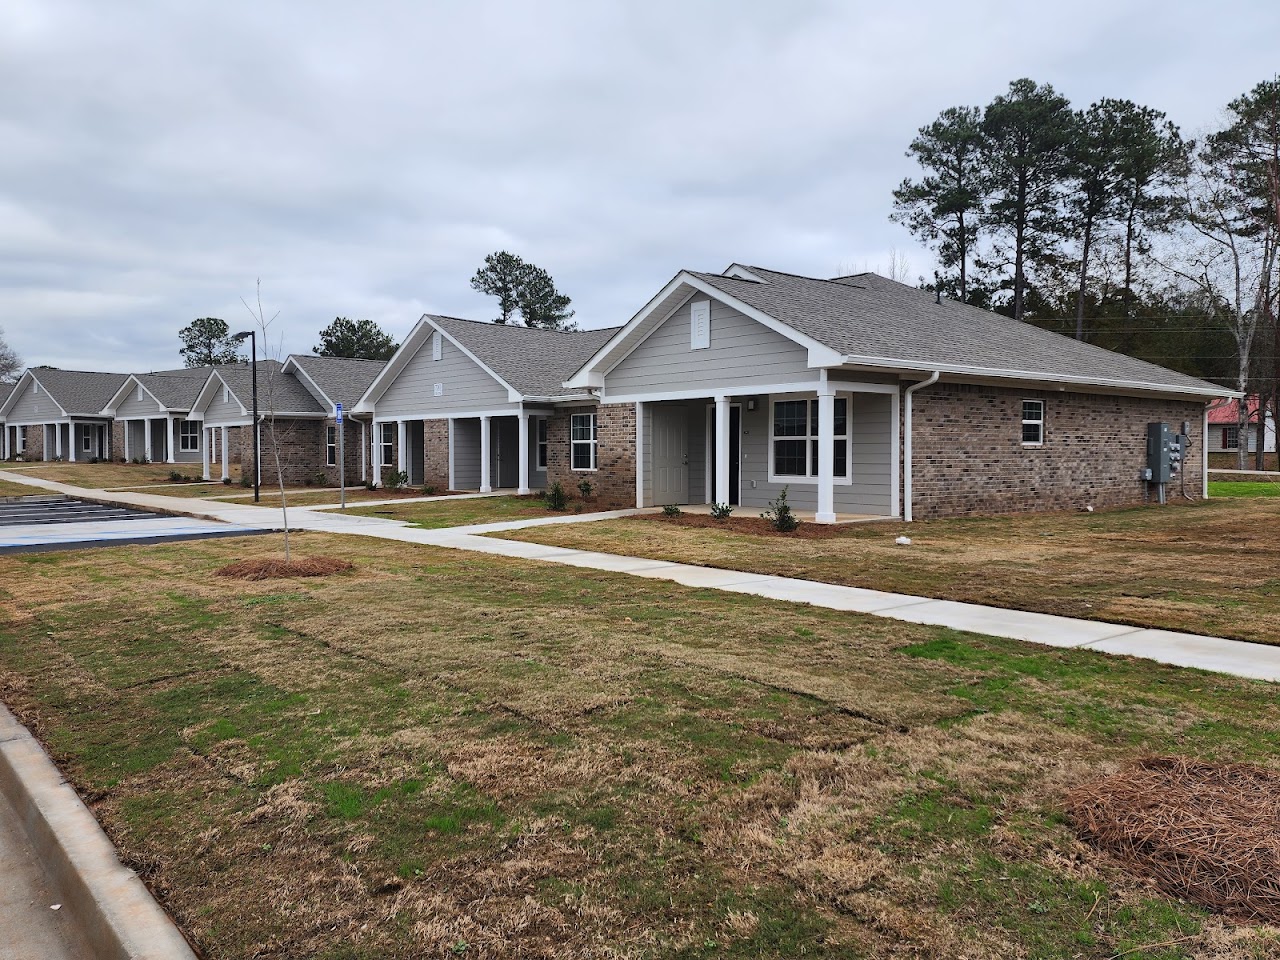 Photo of STONY RIDGE. Affordable housing located at 108 LINCOLN ST HOGANSVILLE, GA 30230